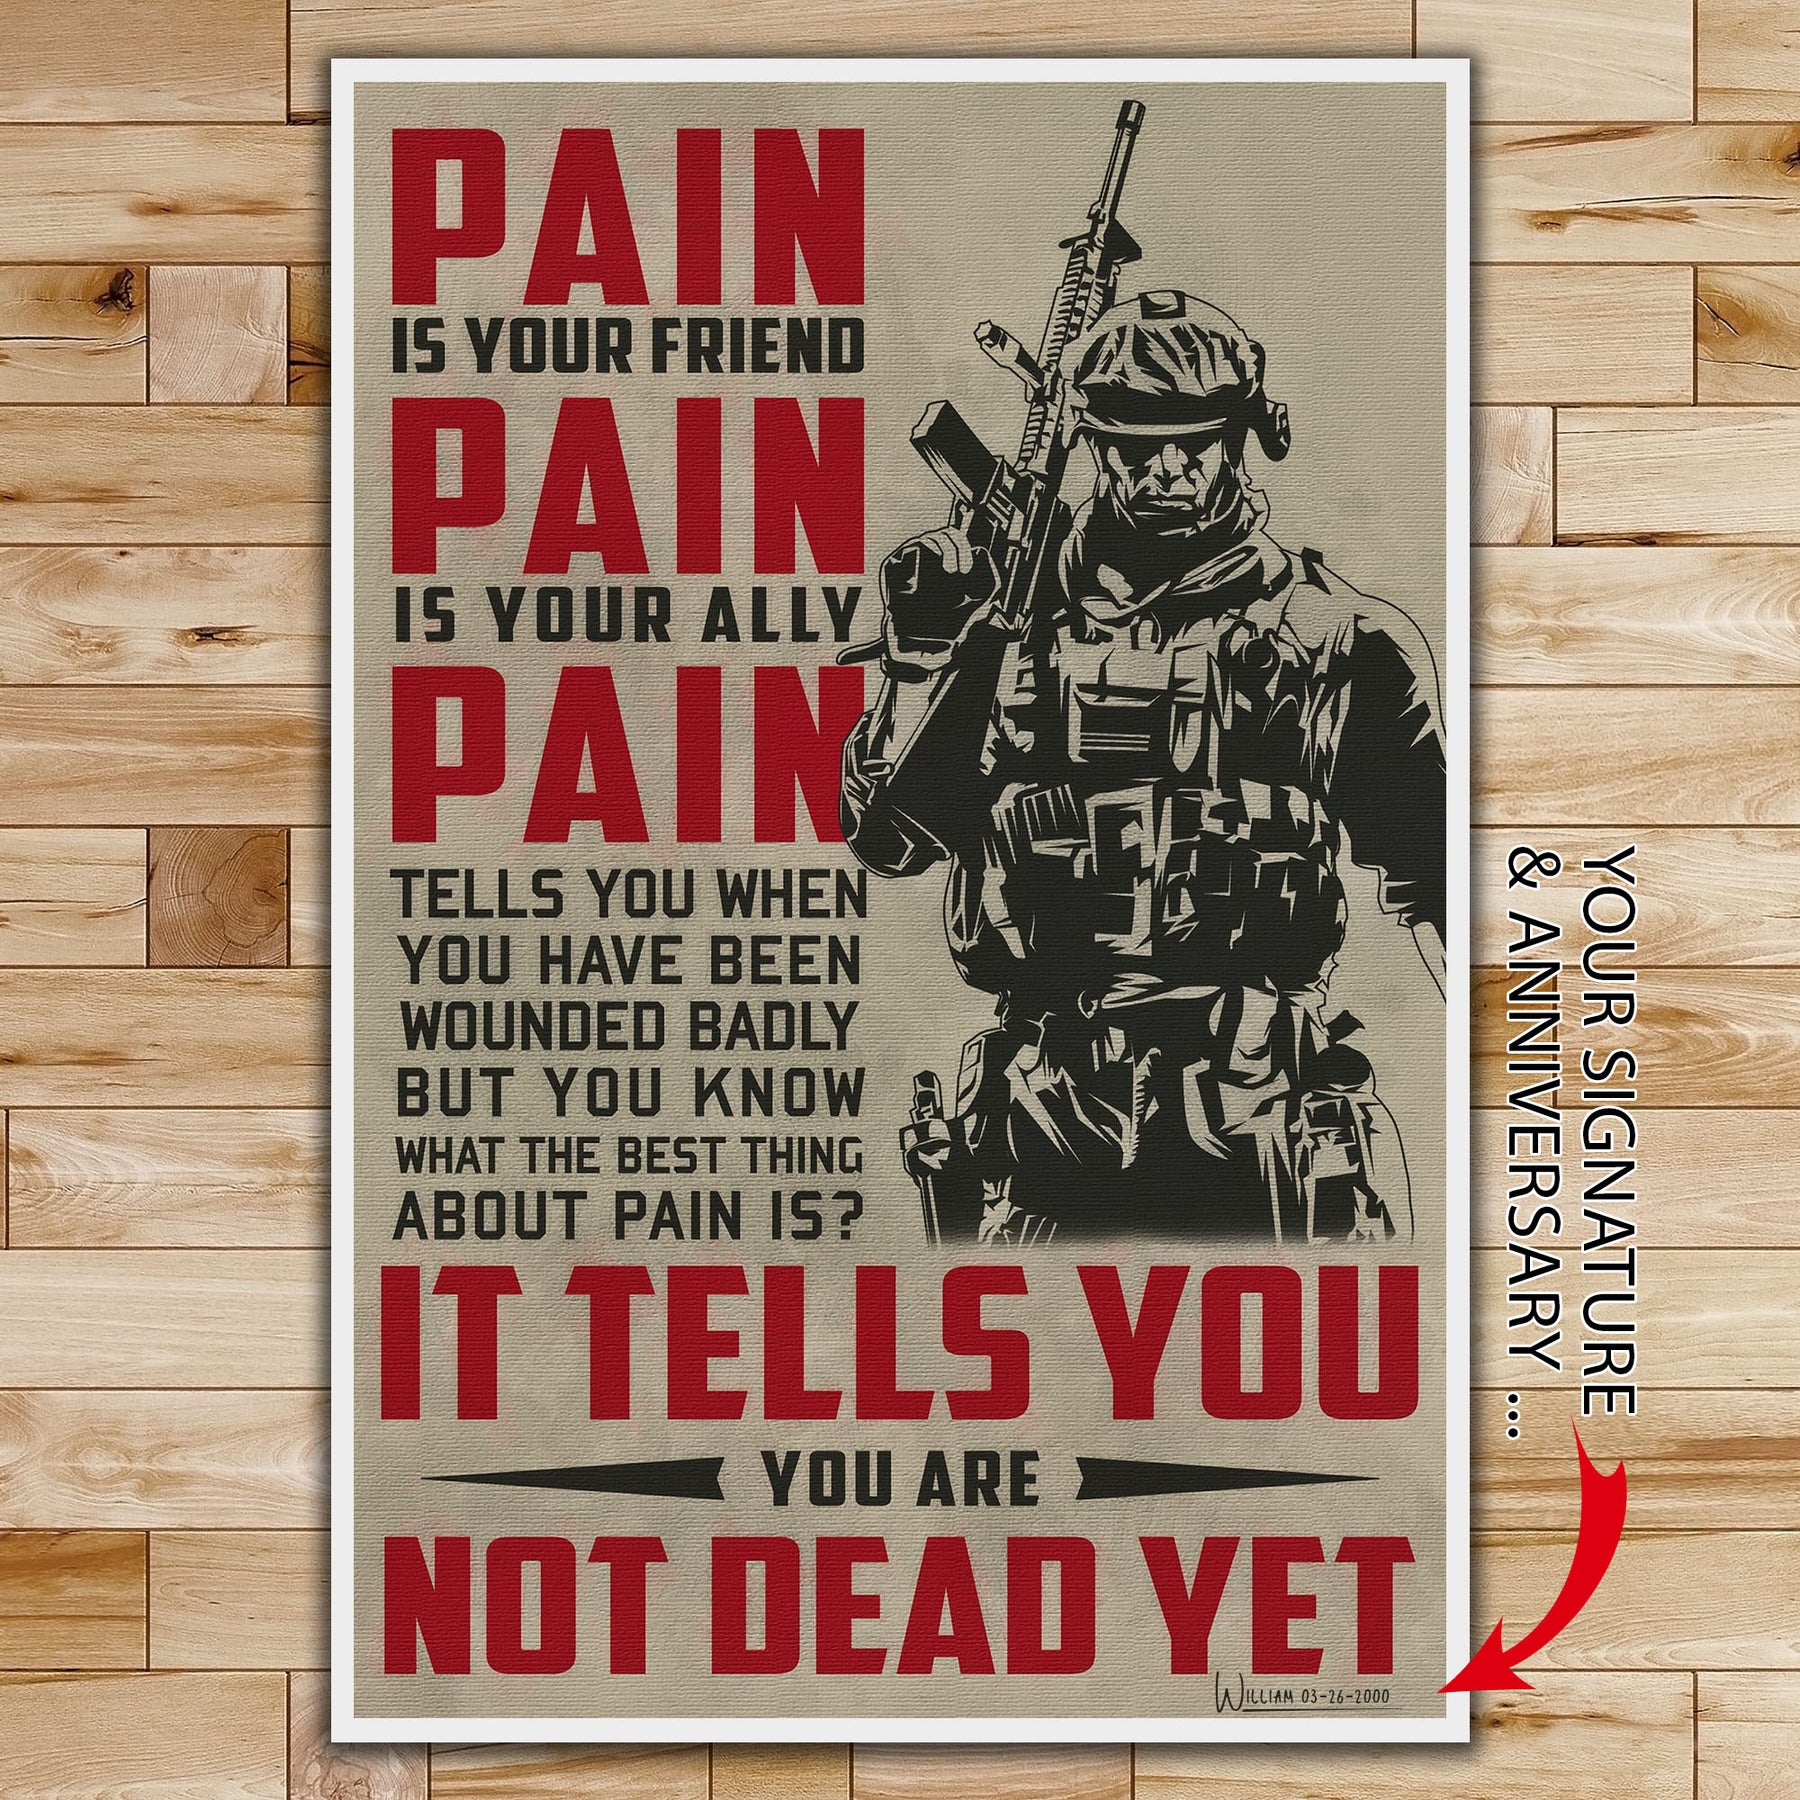 SD019 + SD033 - I'm Not Going To Lose -PAIN - It Tells You - You Are Not Dead Yet - Home Decoration - Vertical Poster - Vertical Canvas - Soldier Poster